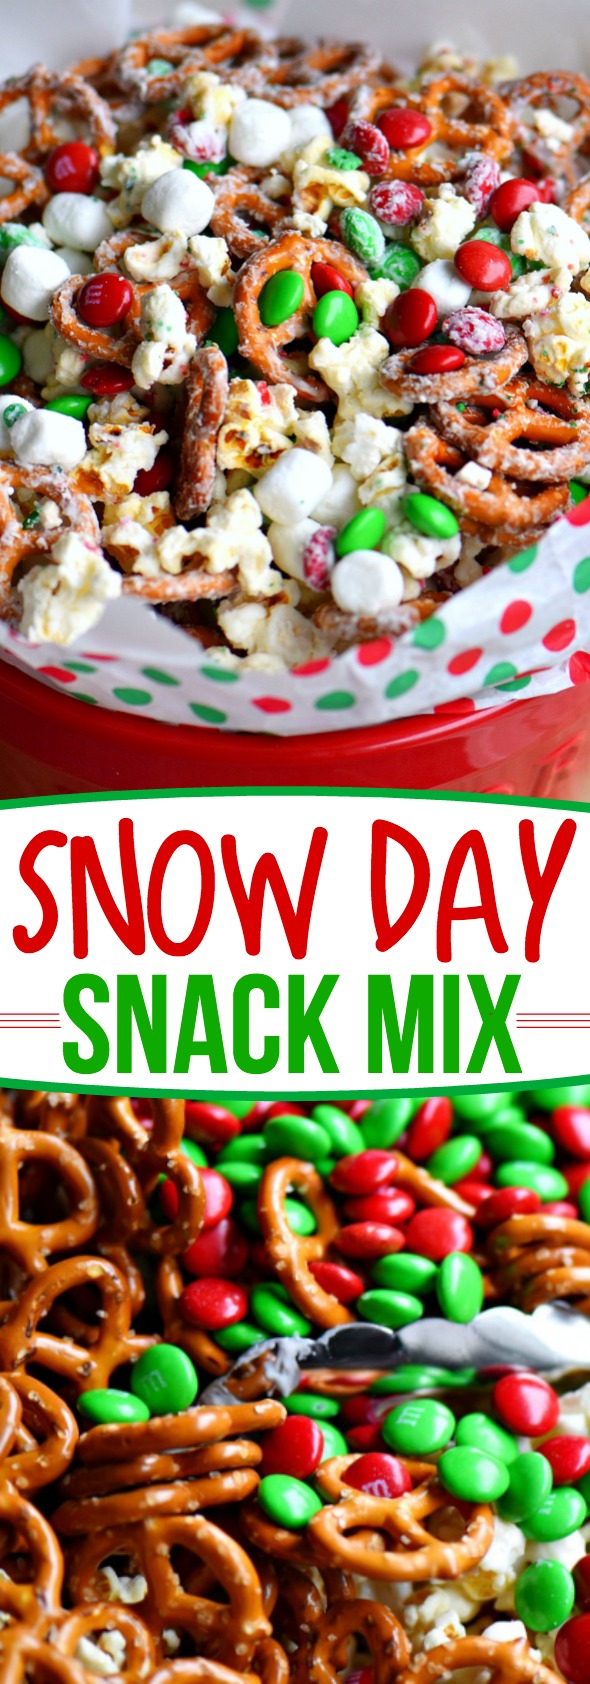 This wonderfully festive Snow Day Snack Mix is the perfect easy treat all holiday season long! Both sweet and salty, this holiday snack mix is great for Christmas, movie nights, parties, gifts and so much more! // Mom On Timeout #christmas #dessert #snack #pretzels #marshmallows #redandgreen #momontimeout